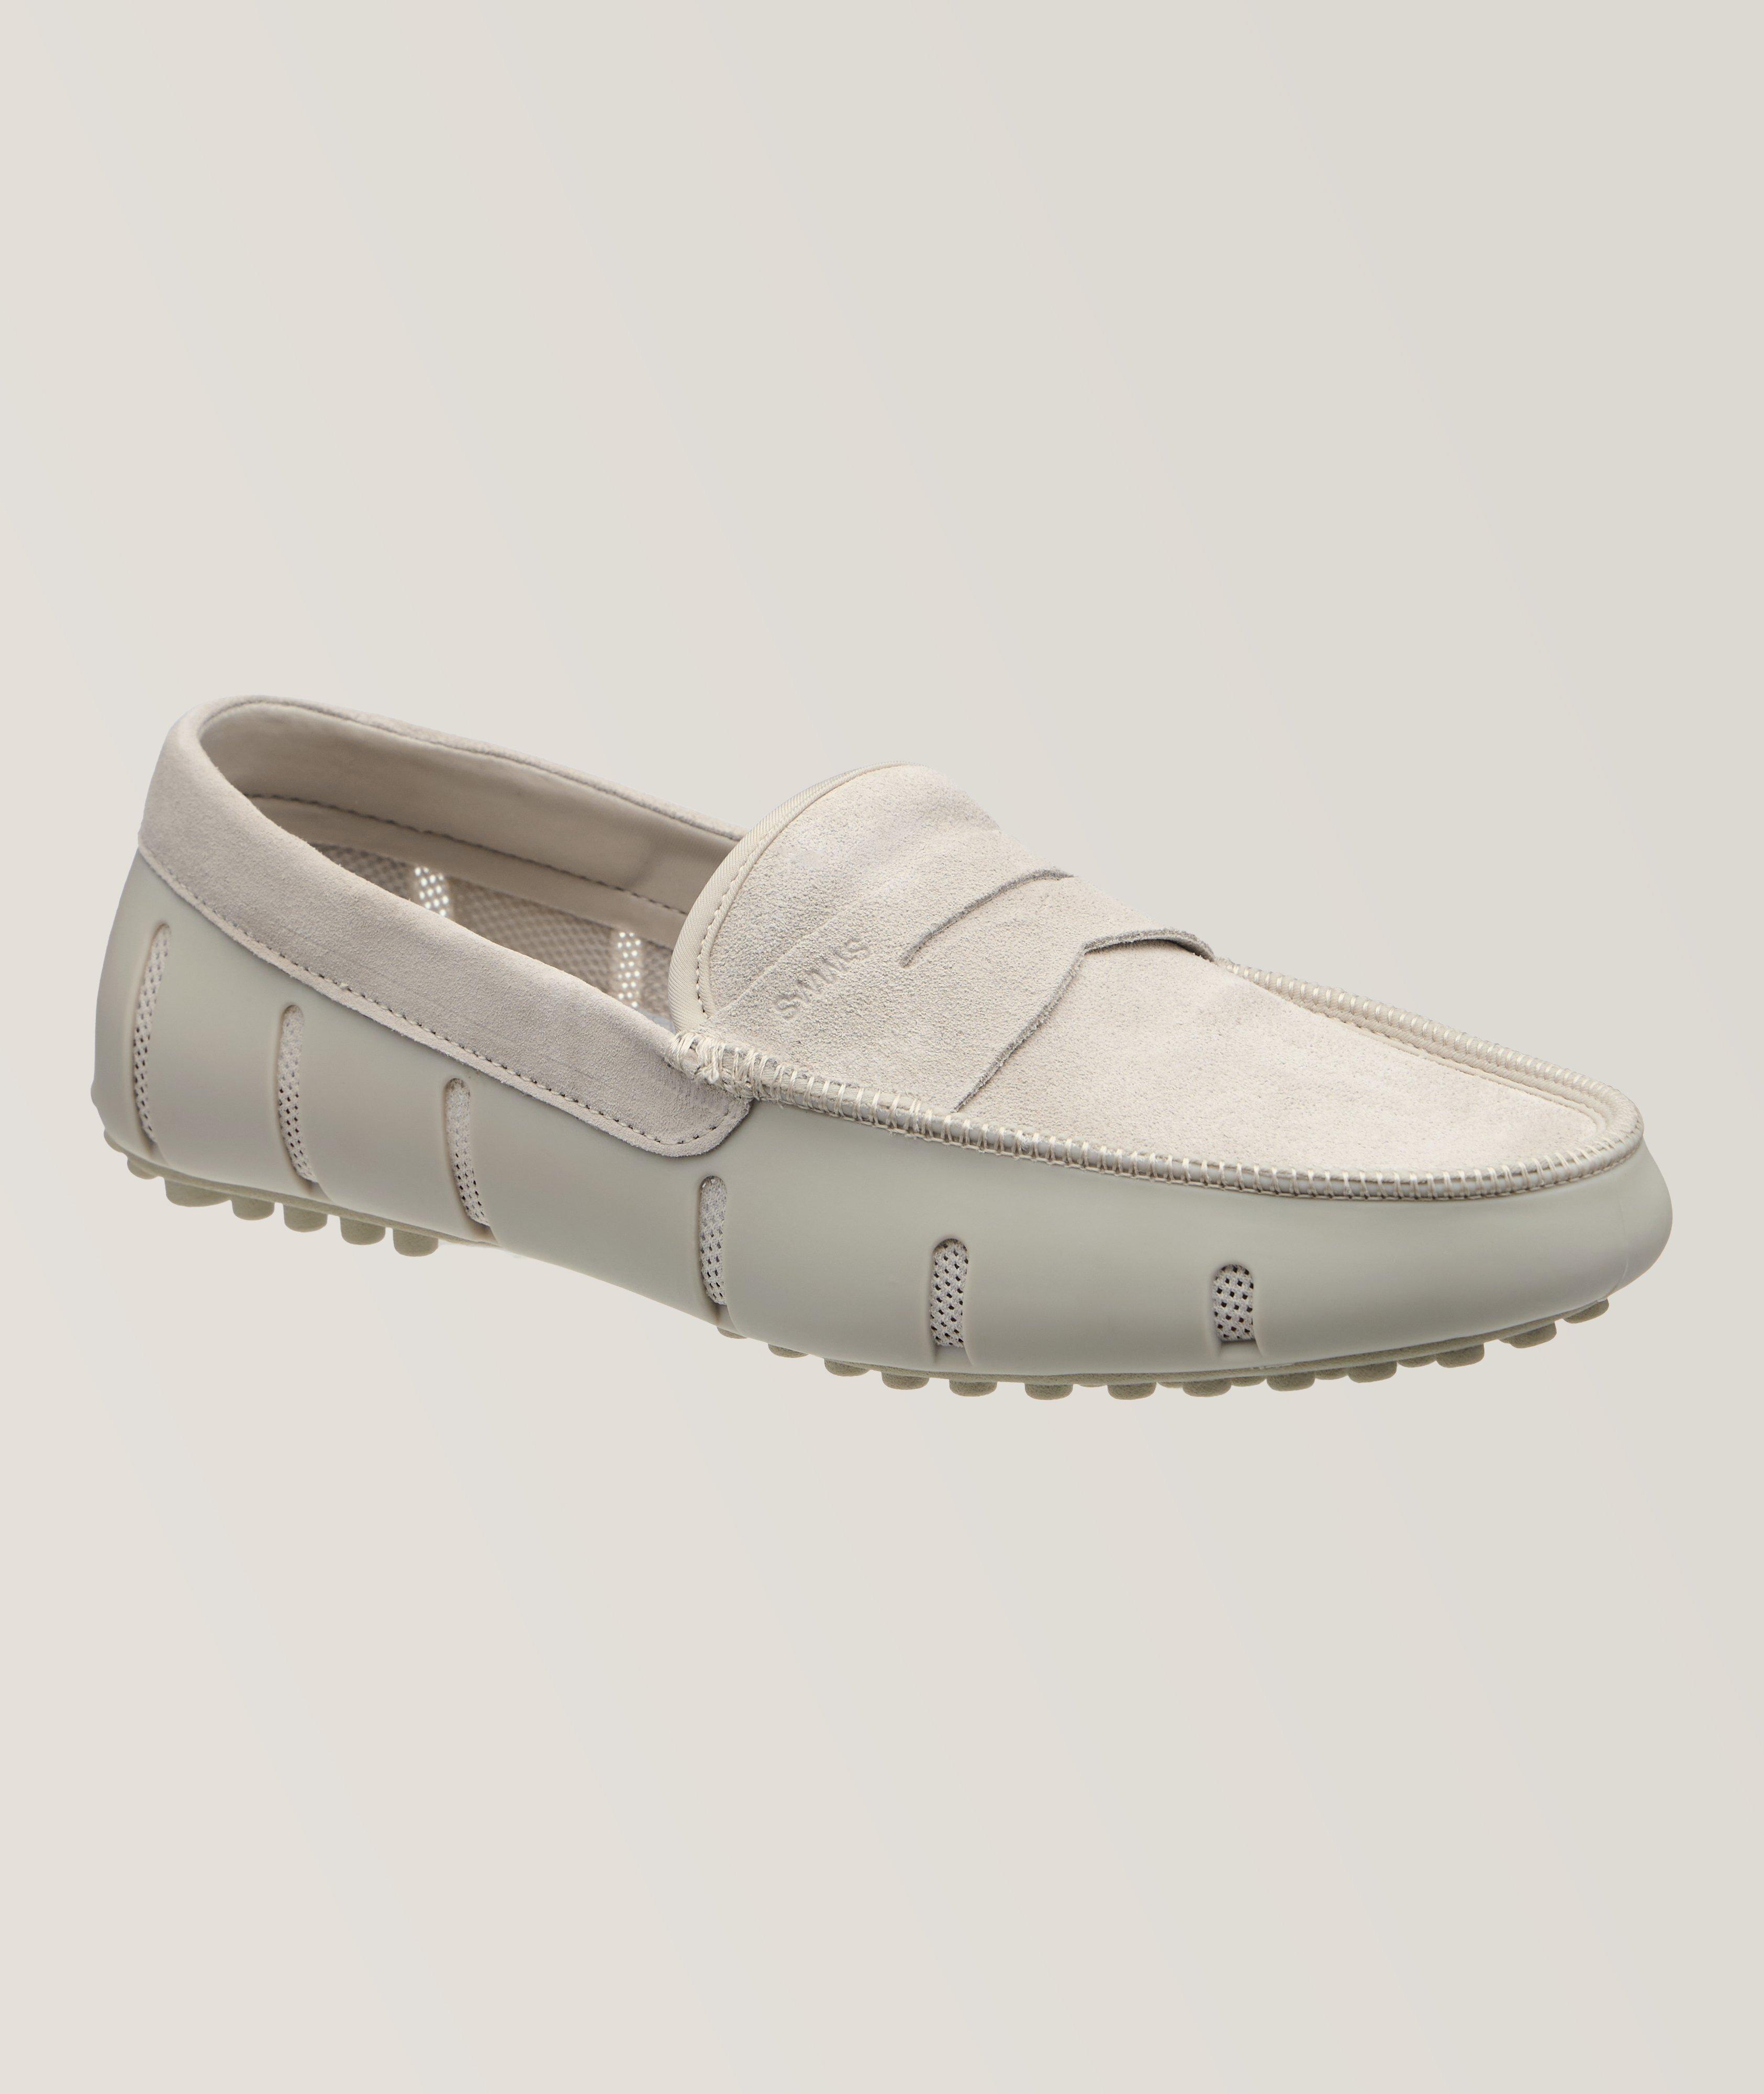 Lux Driver Penny Loafers image 0